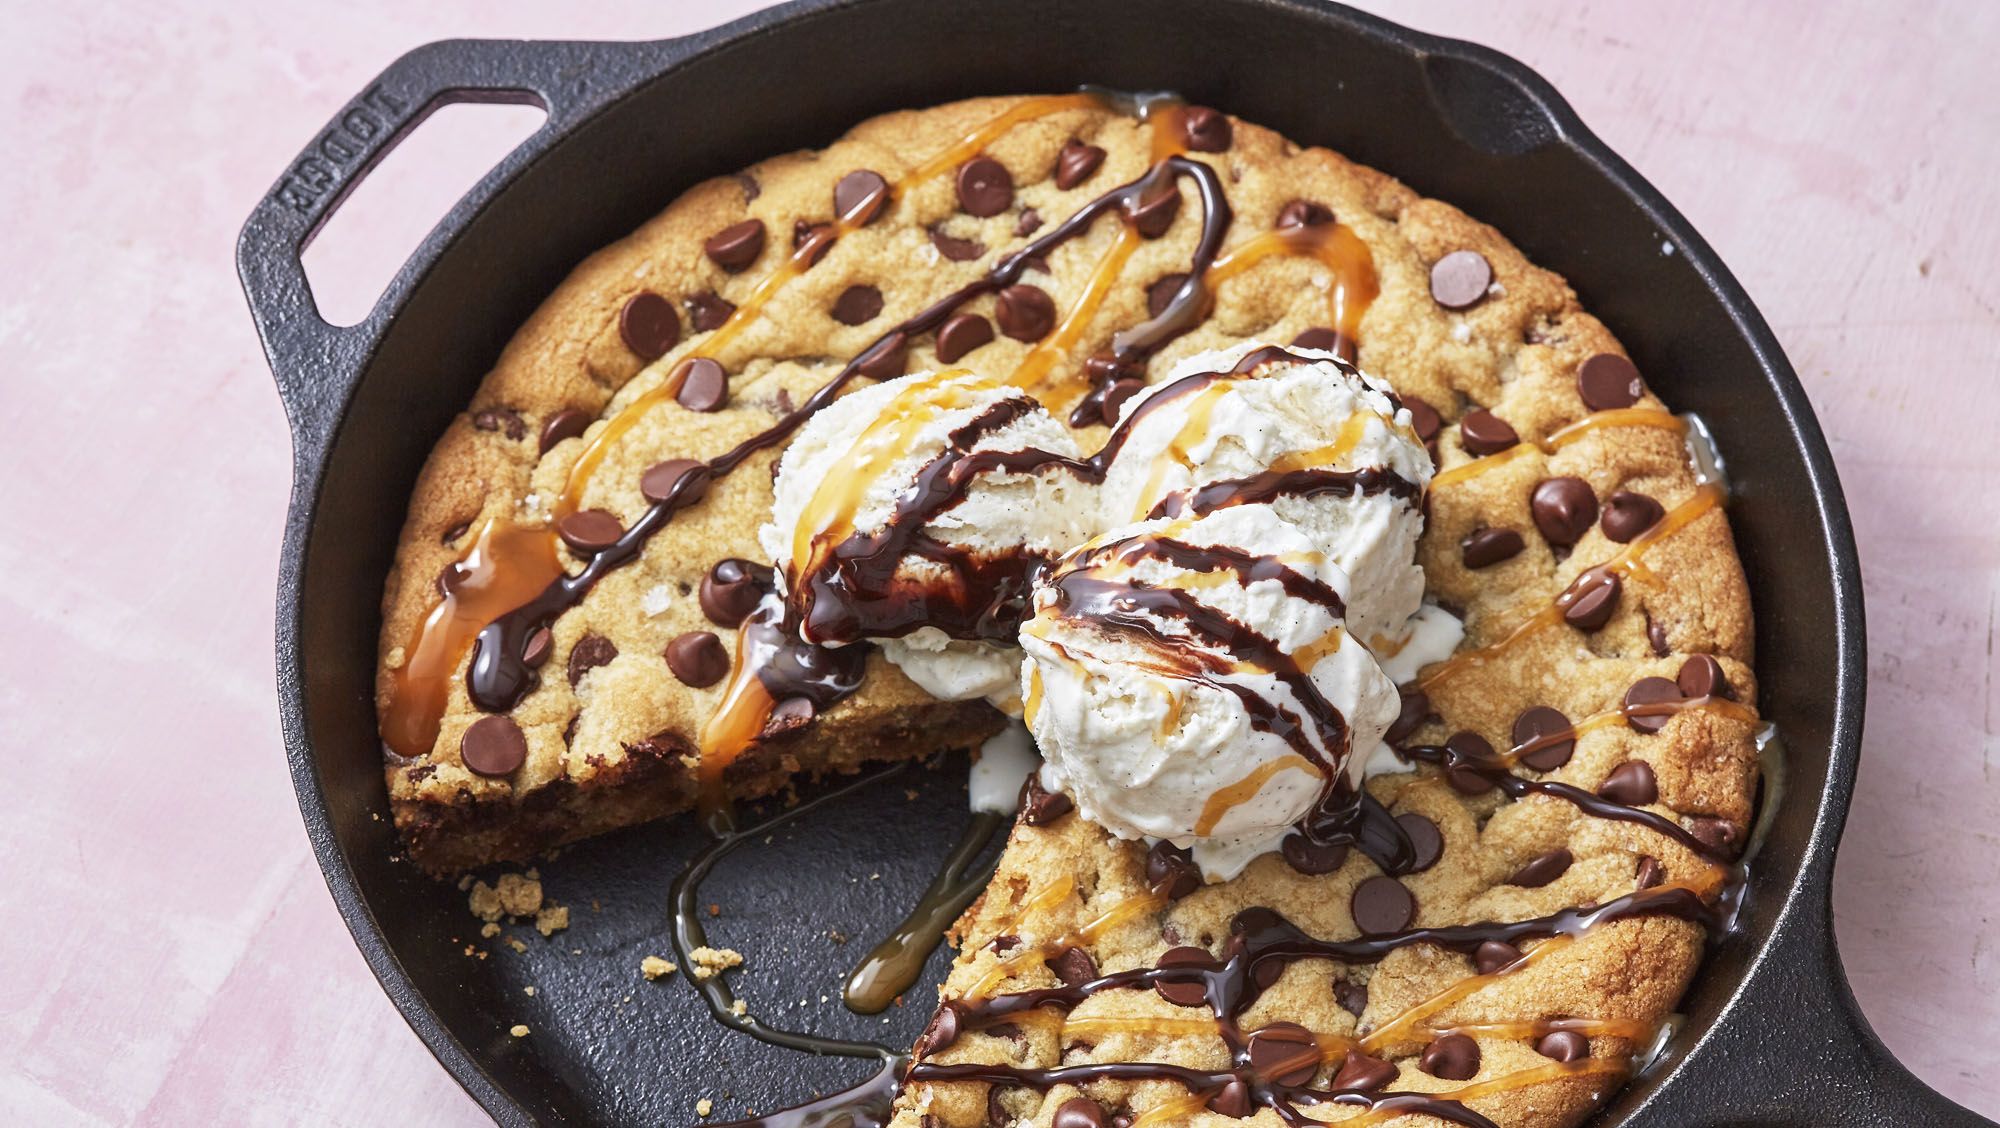 Skillet Chocolate Chip Cookie Recipe - Easy Chocolate Chip Skillet